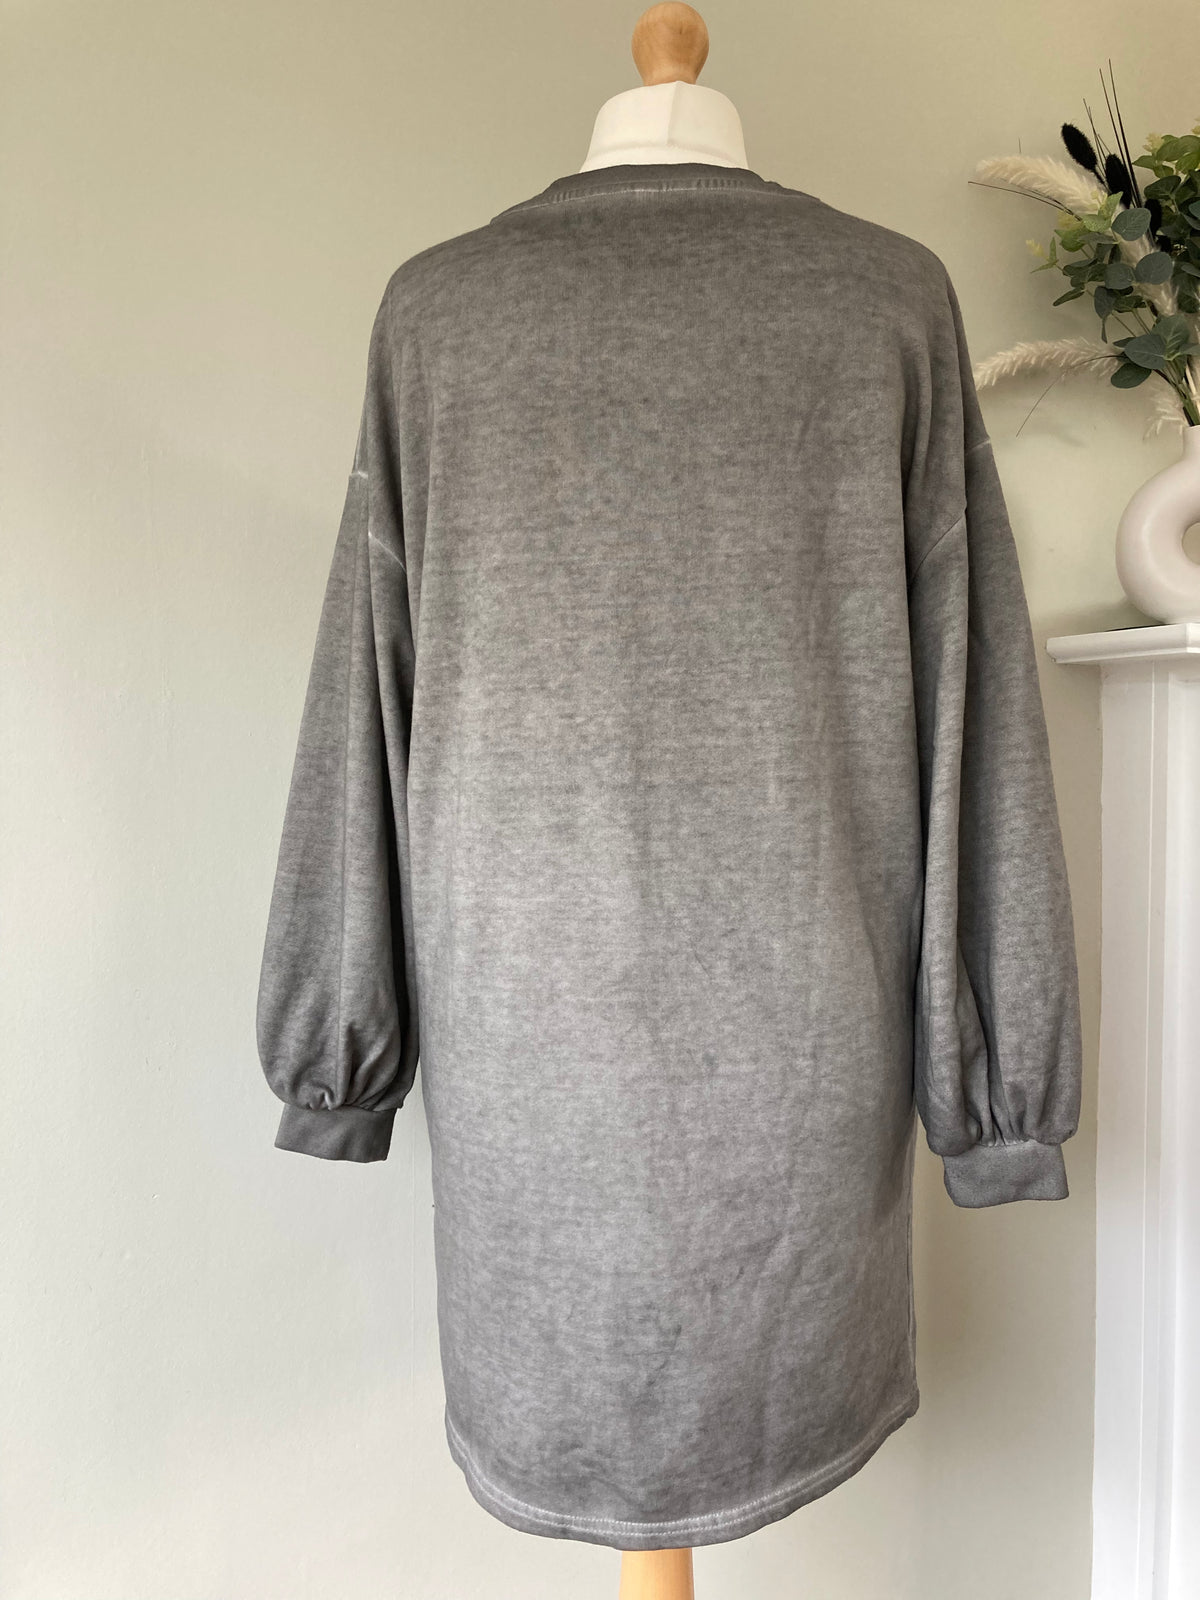 Grey long jumper by FREEMANS - Size 14